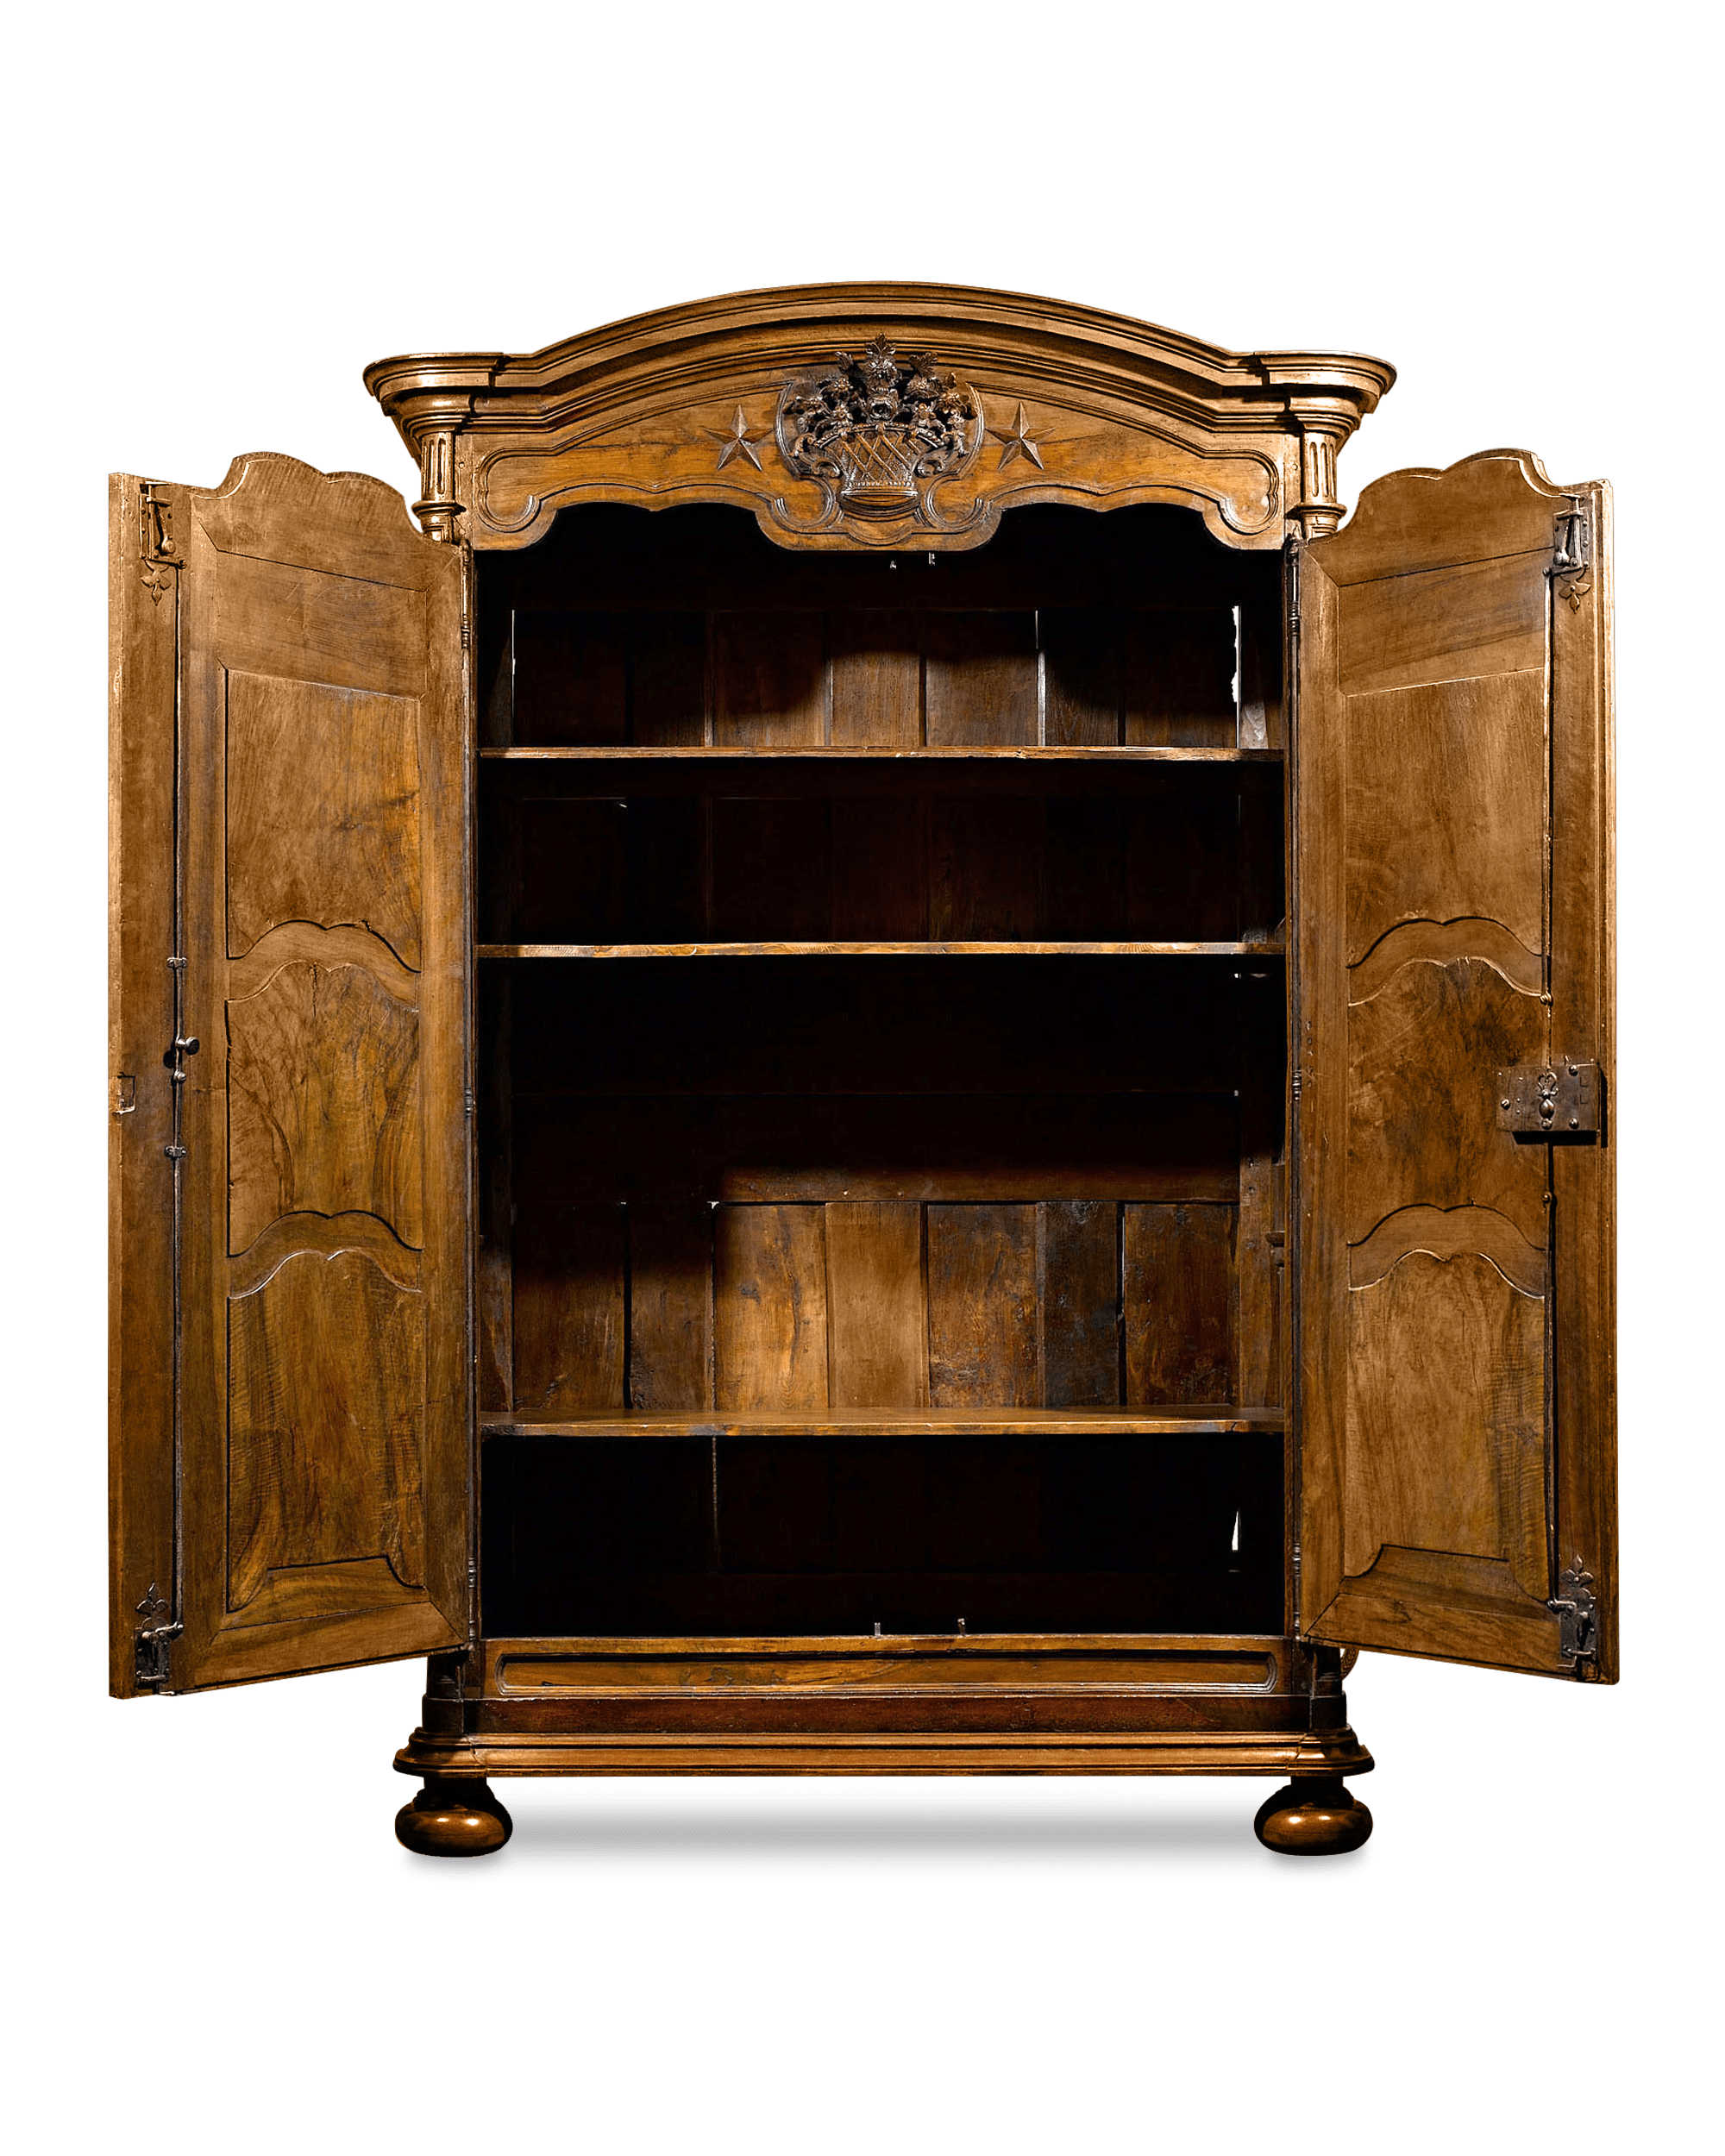 This double door armoire features a large storage space and original interiors